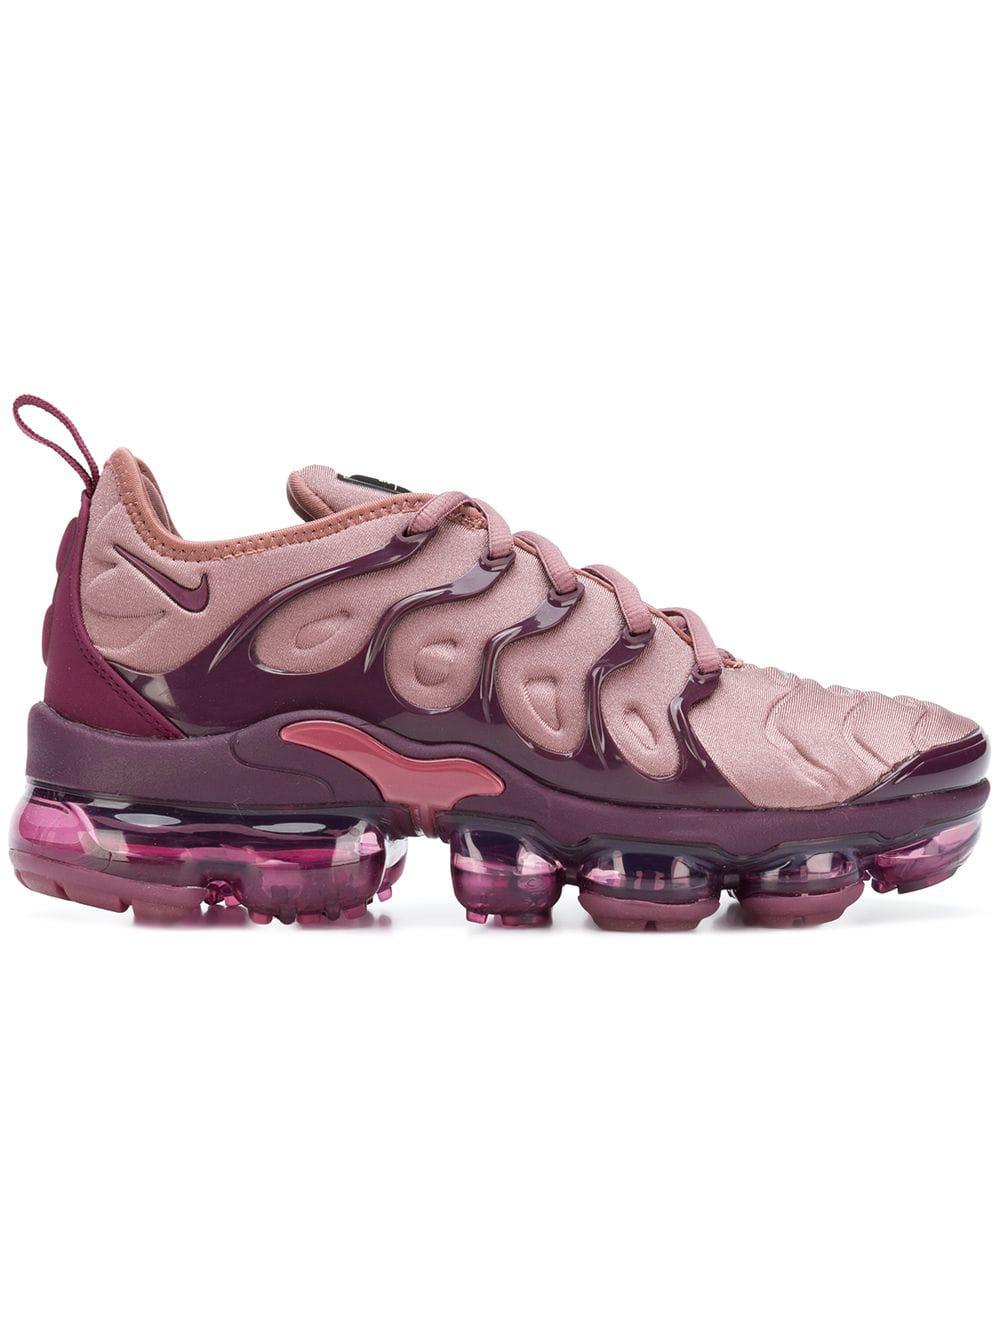 vapormax plus pink and purple